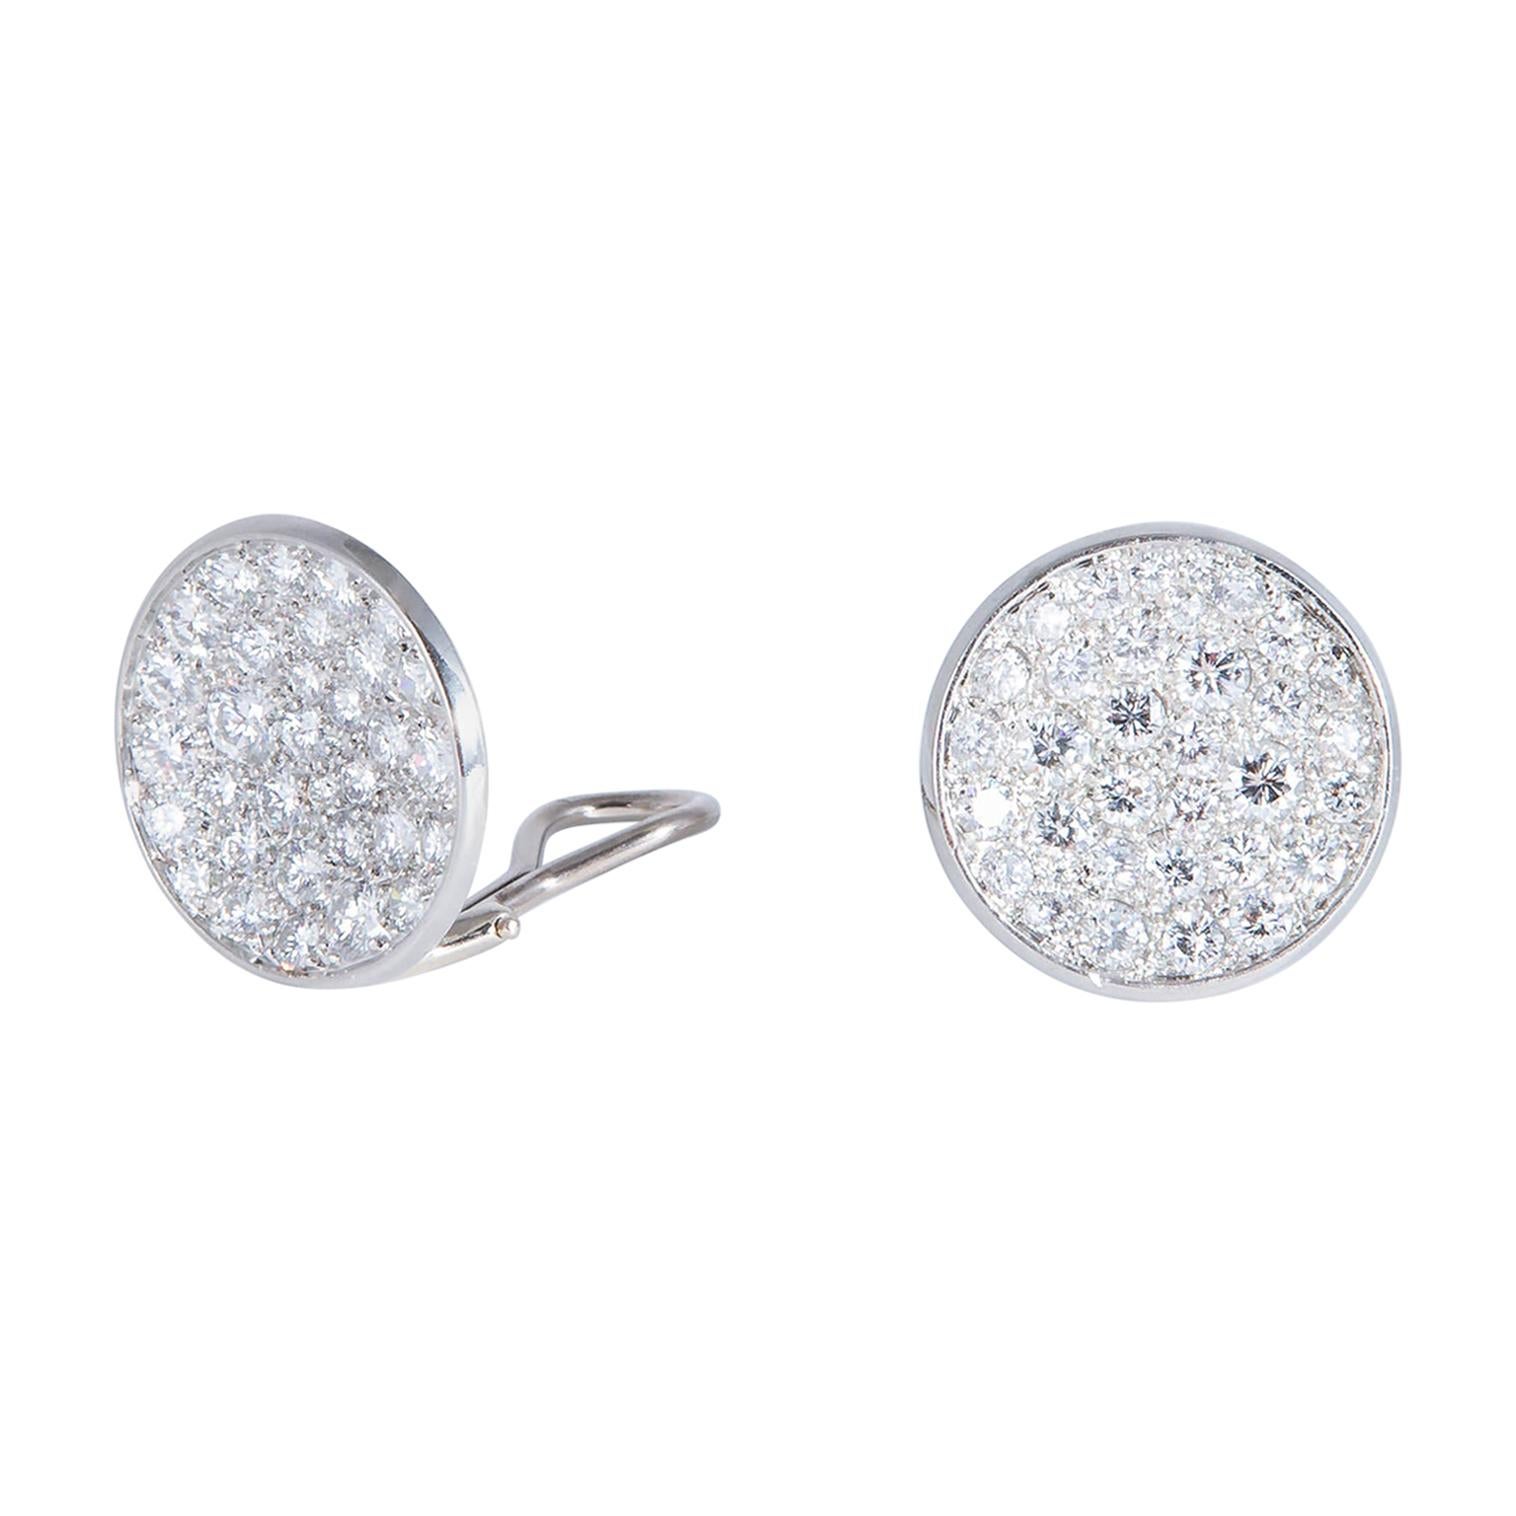 Classic White Gold and Diamond Earrings